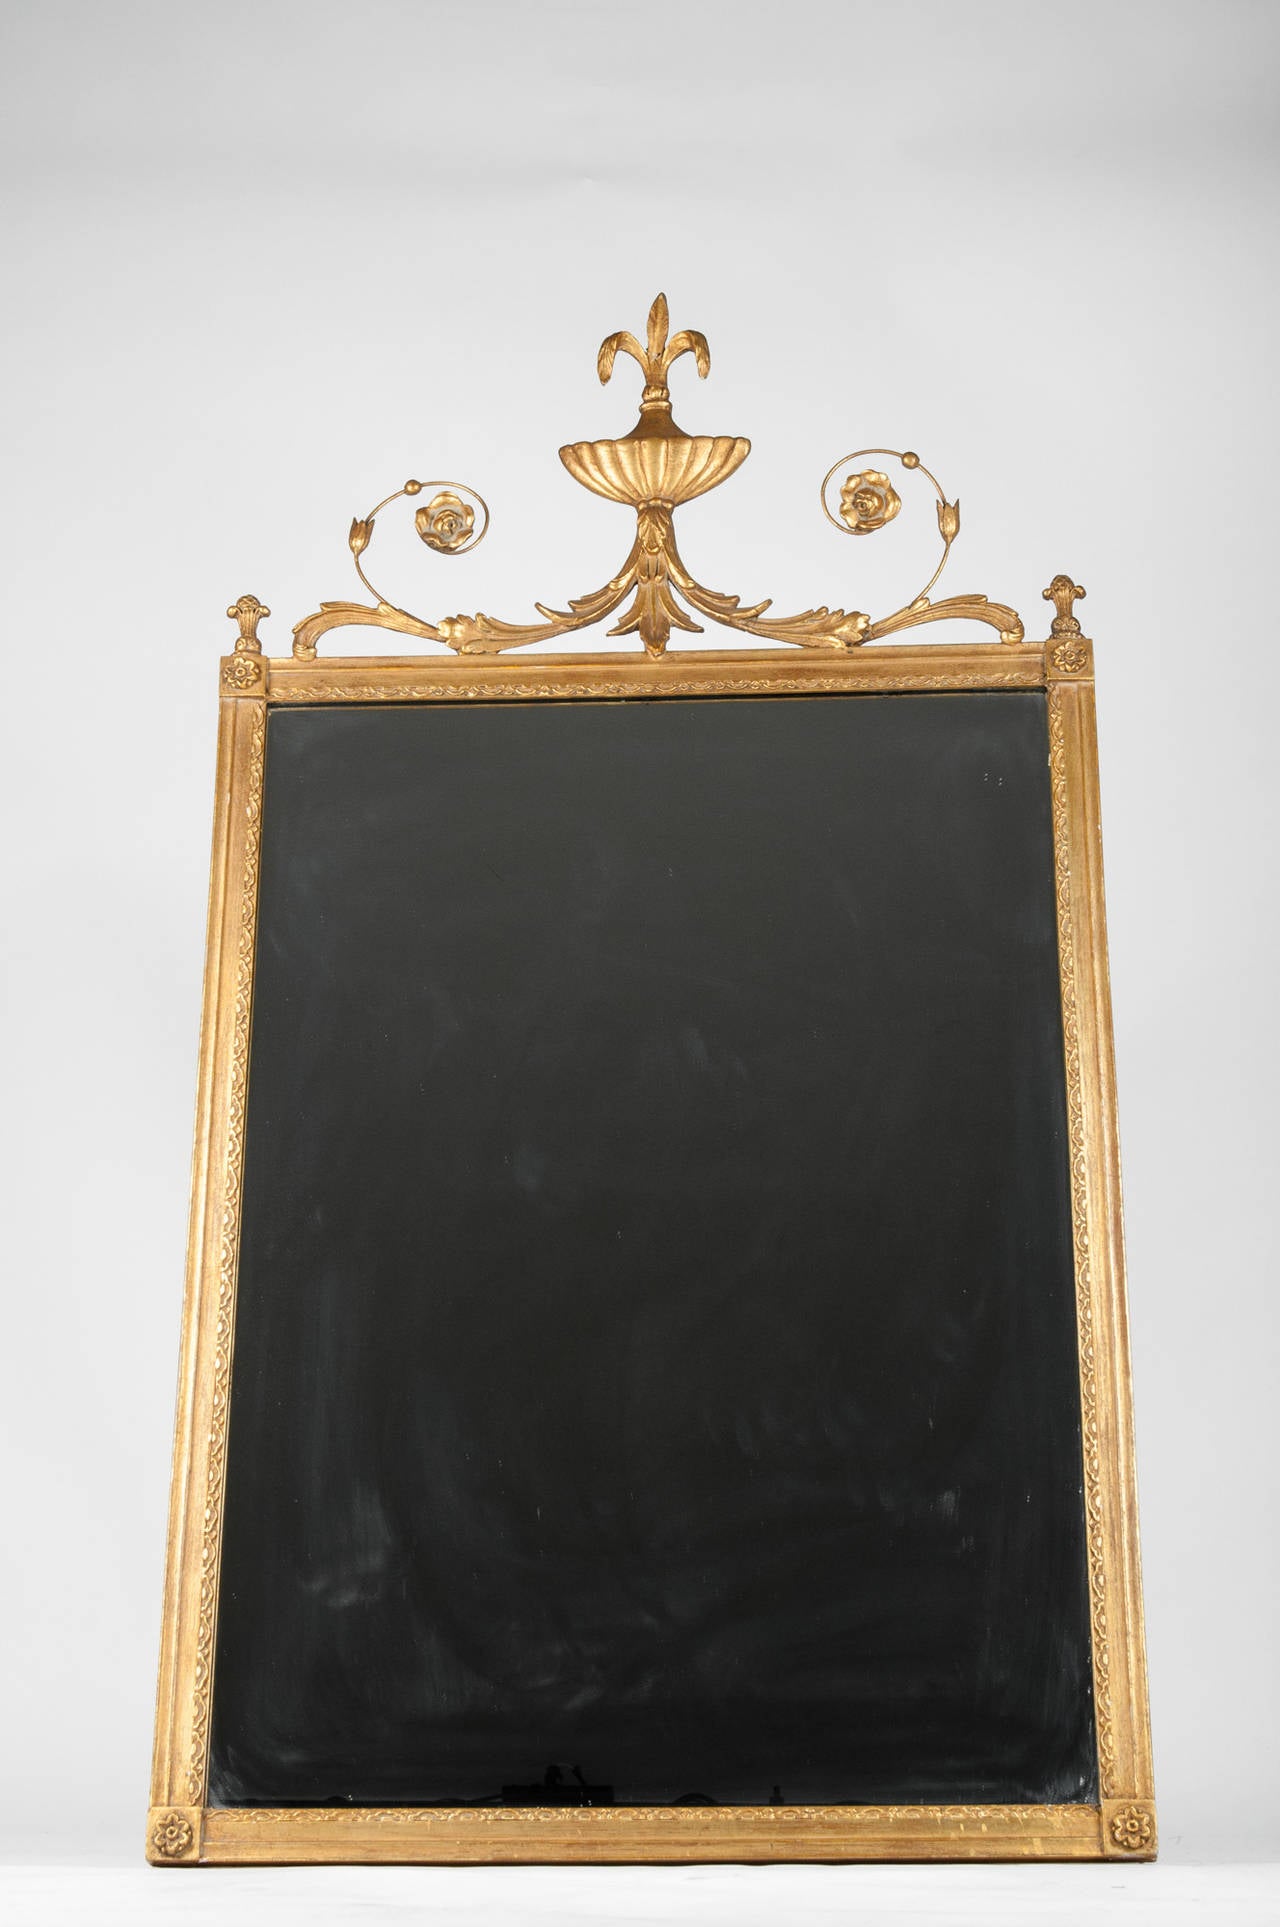 Neoclassical Gold Gilt Mirror with Urn Top